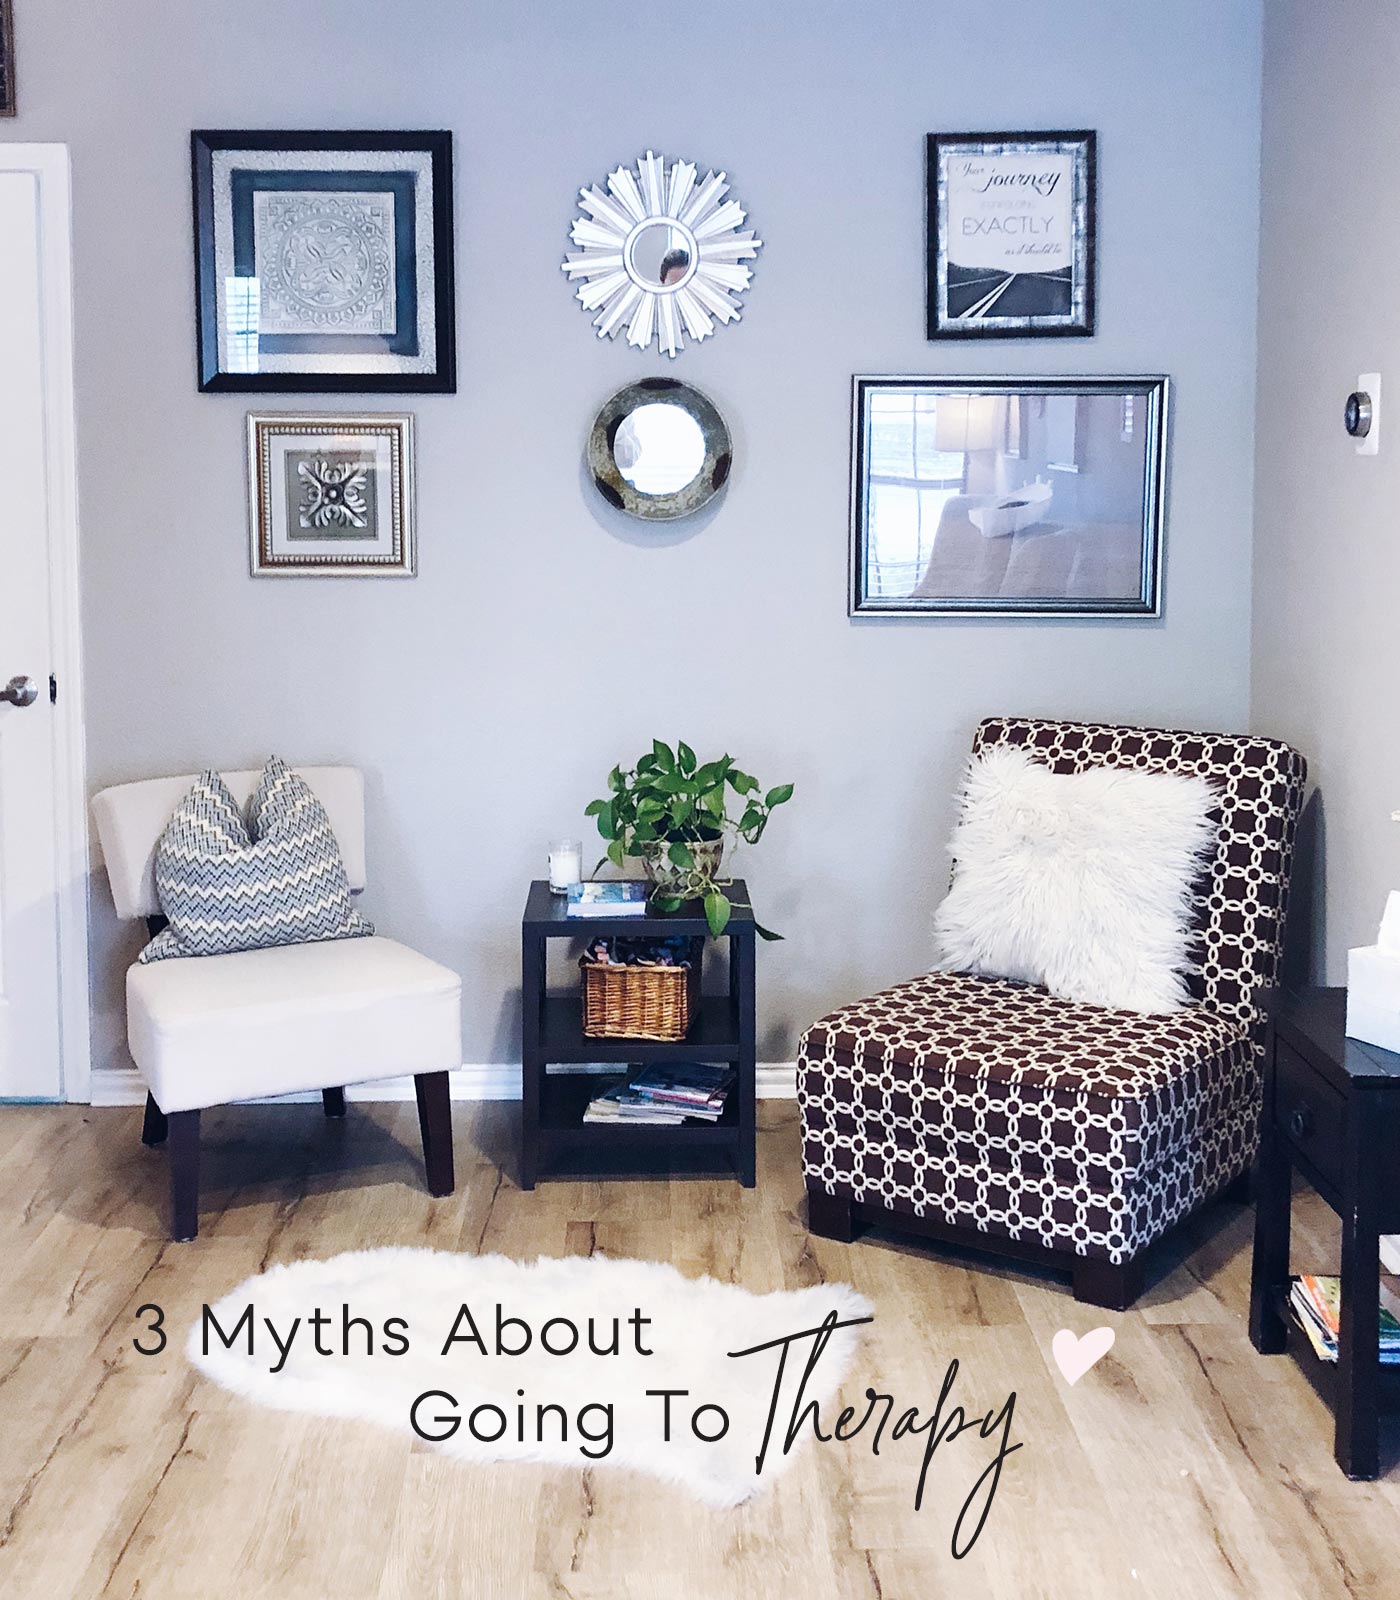 3 Myths About Therapy